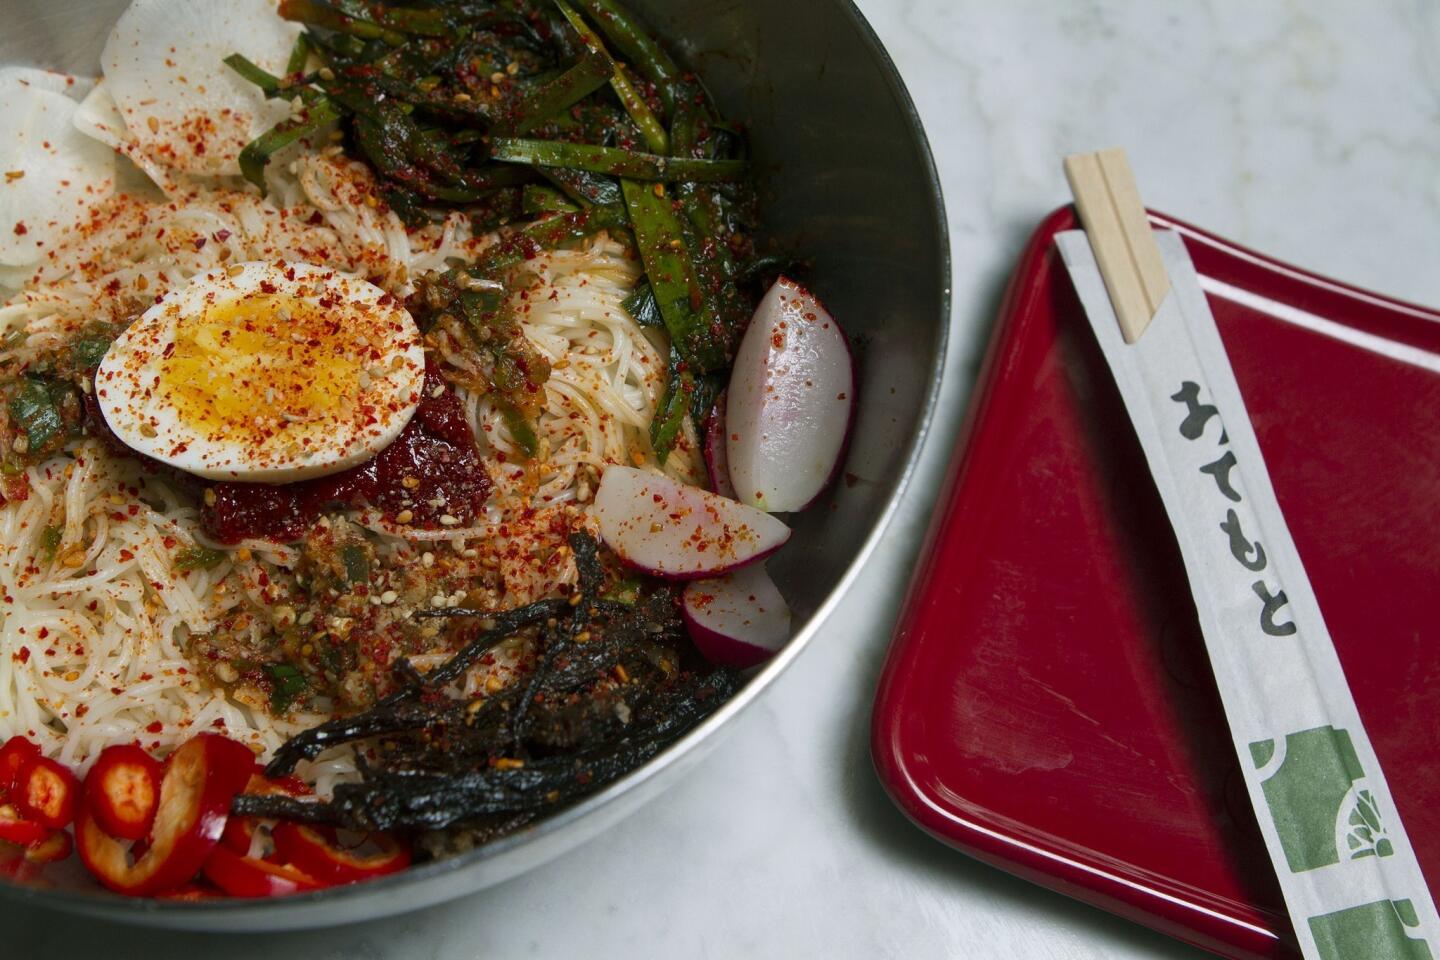 Pot offers a "noodle of the day." This day's offering comes with chilled noodles, various raw and pickled vegetables, chile paste, shredded beef and a hard-boiled egg.